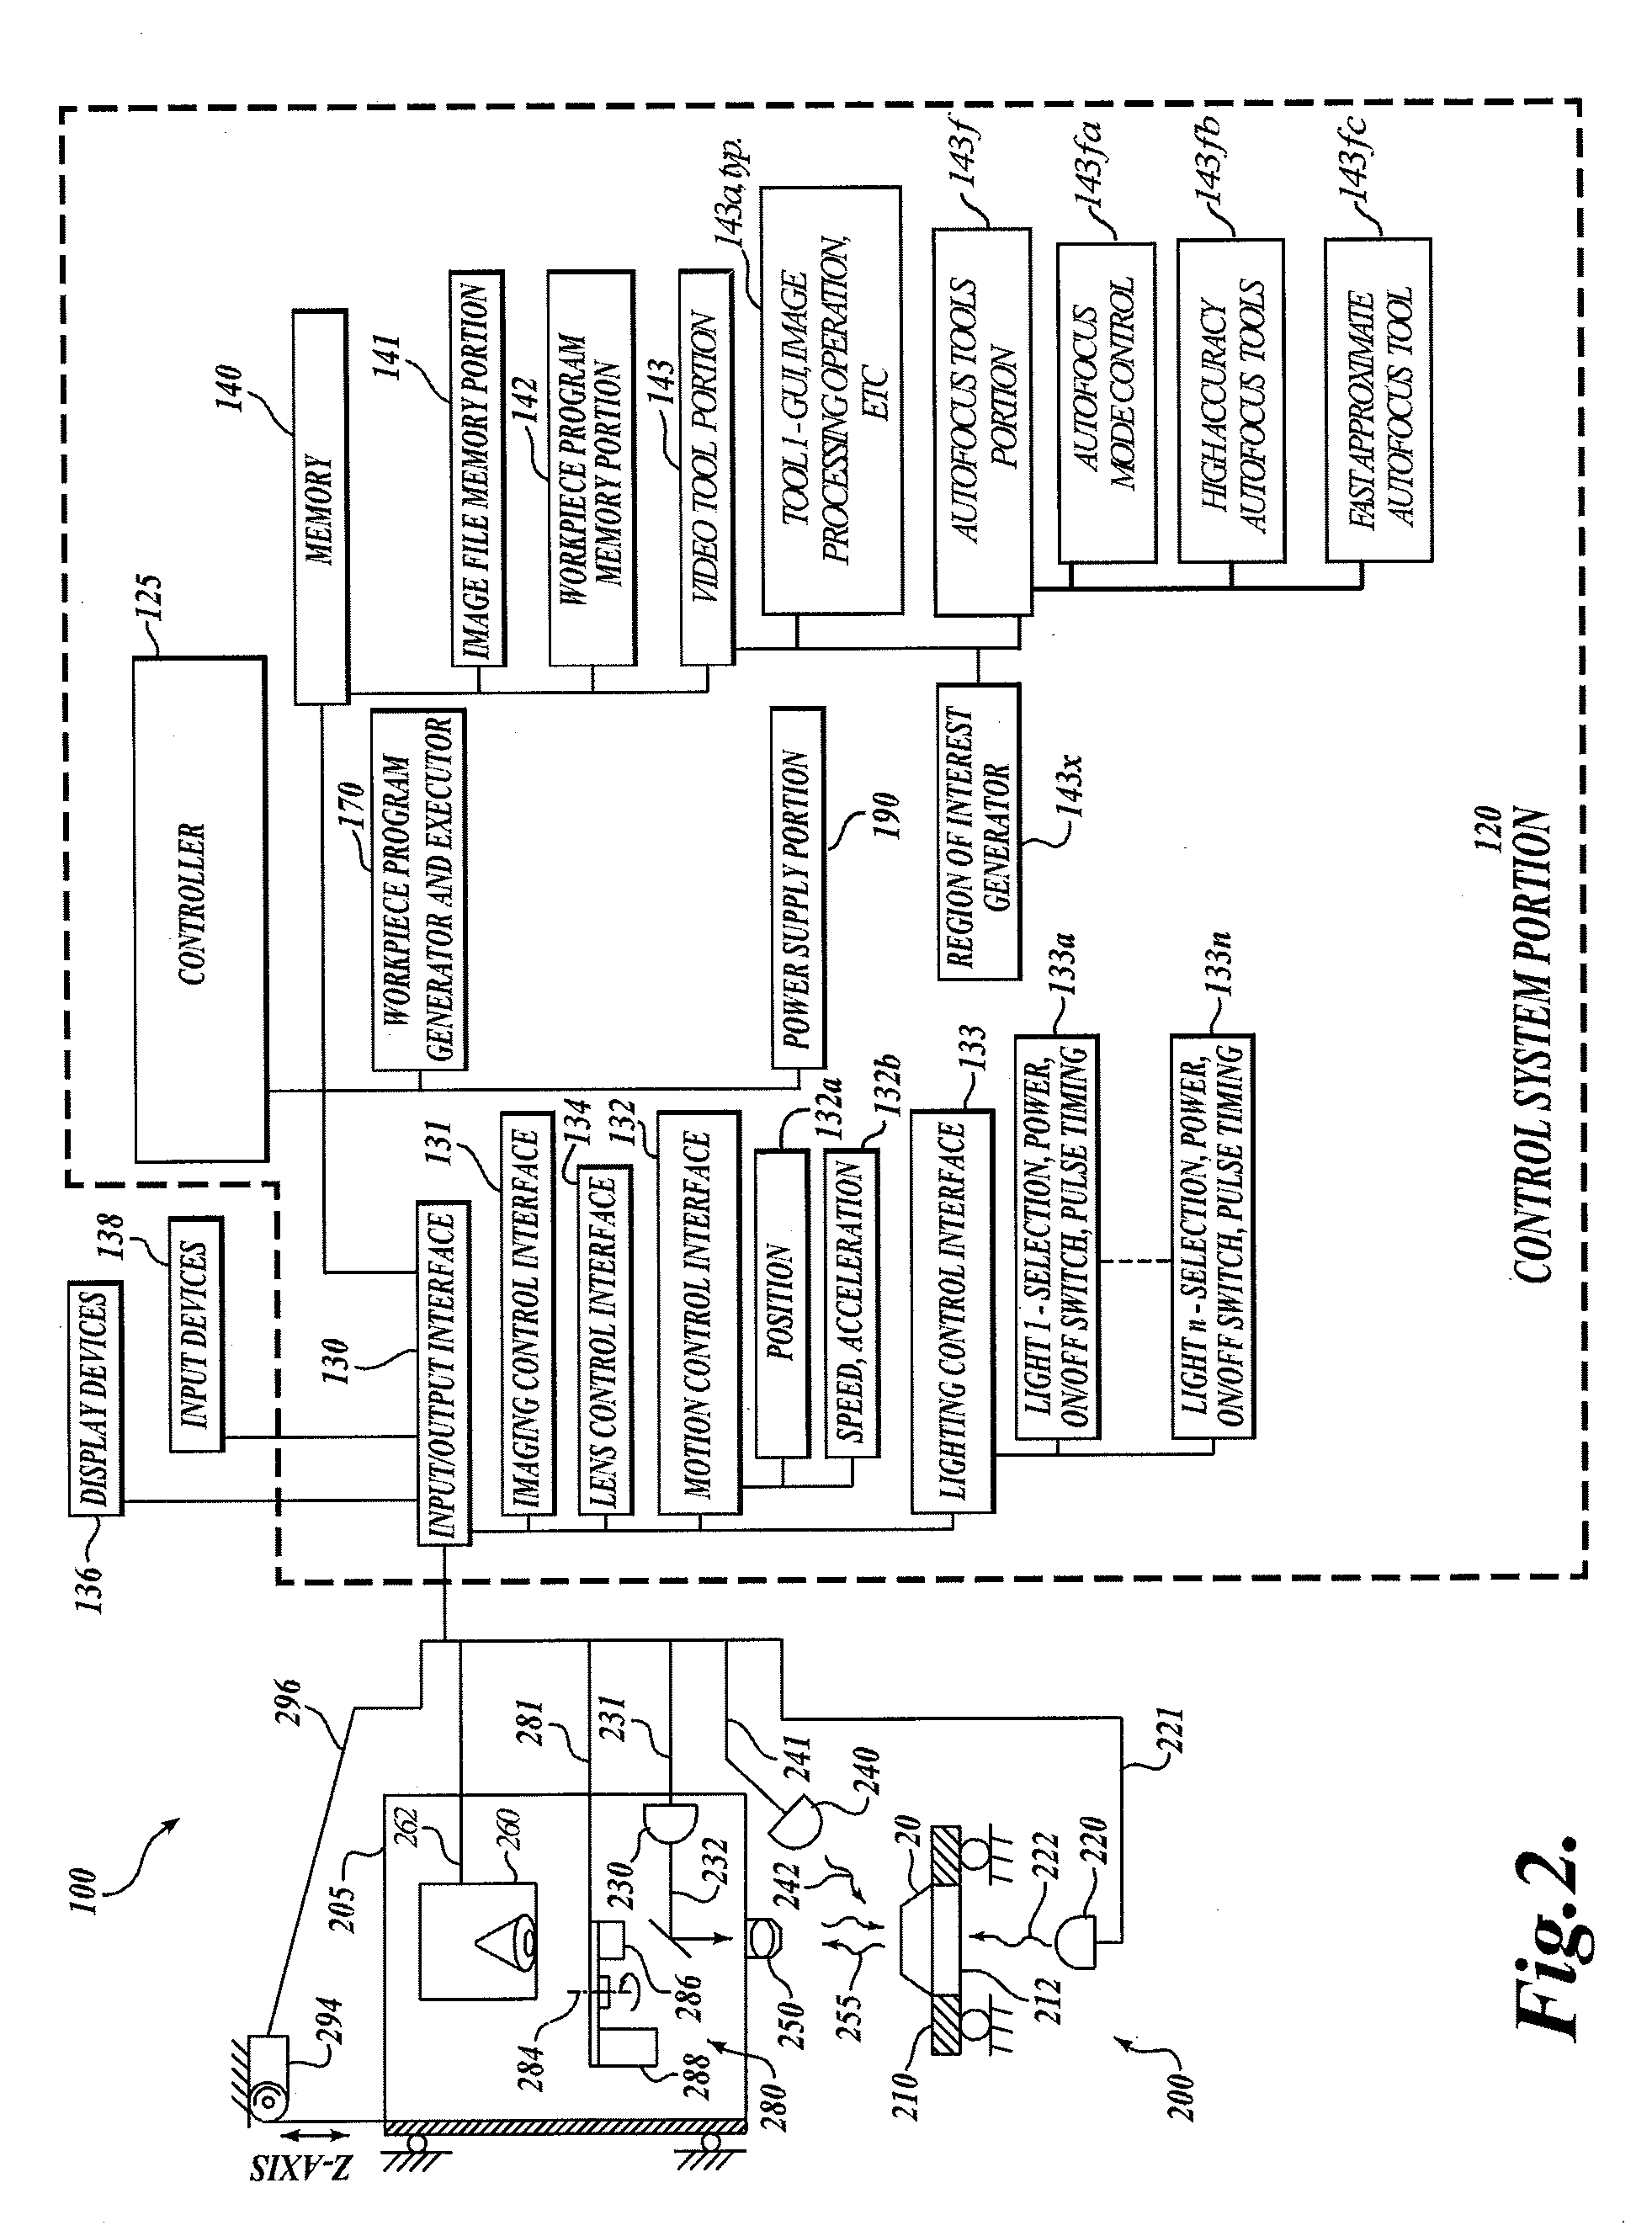 System and method for fast approximate focus